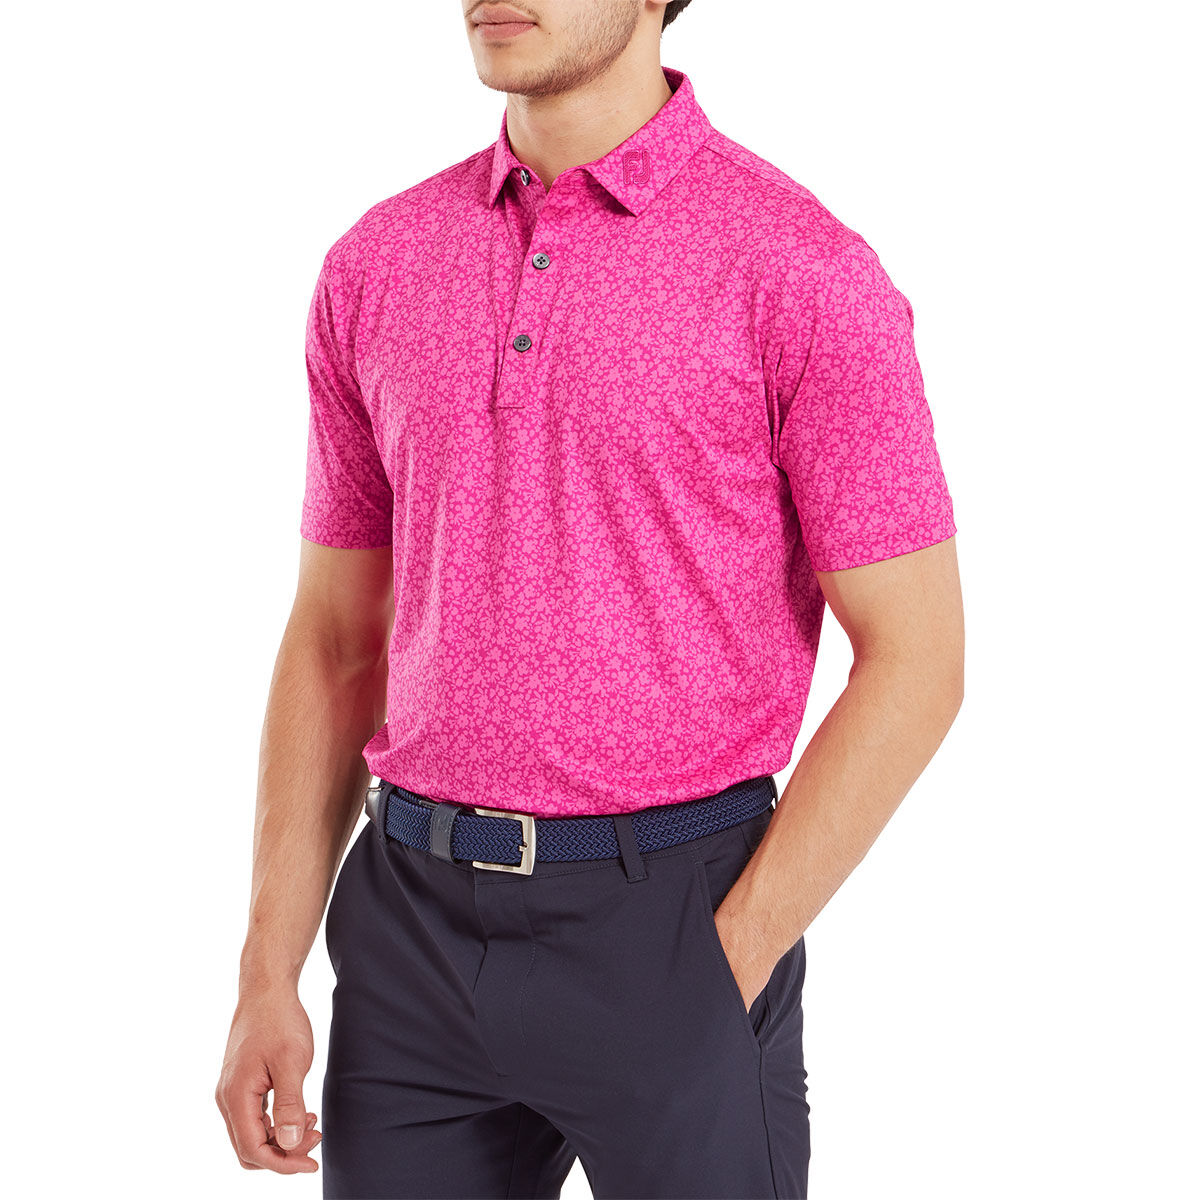 FootJoy Men's Painted Floral Golf Polo Shirt, Mens, Berry, Large | American Golf von FootJoy